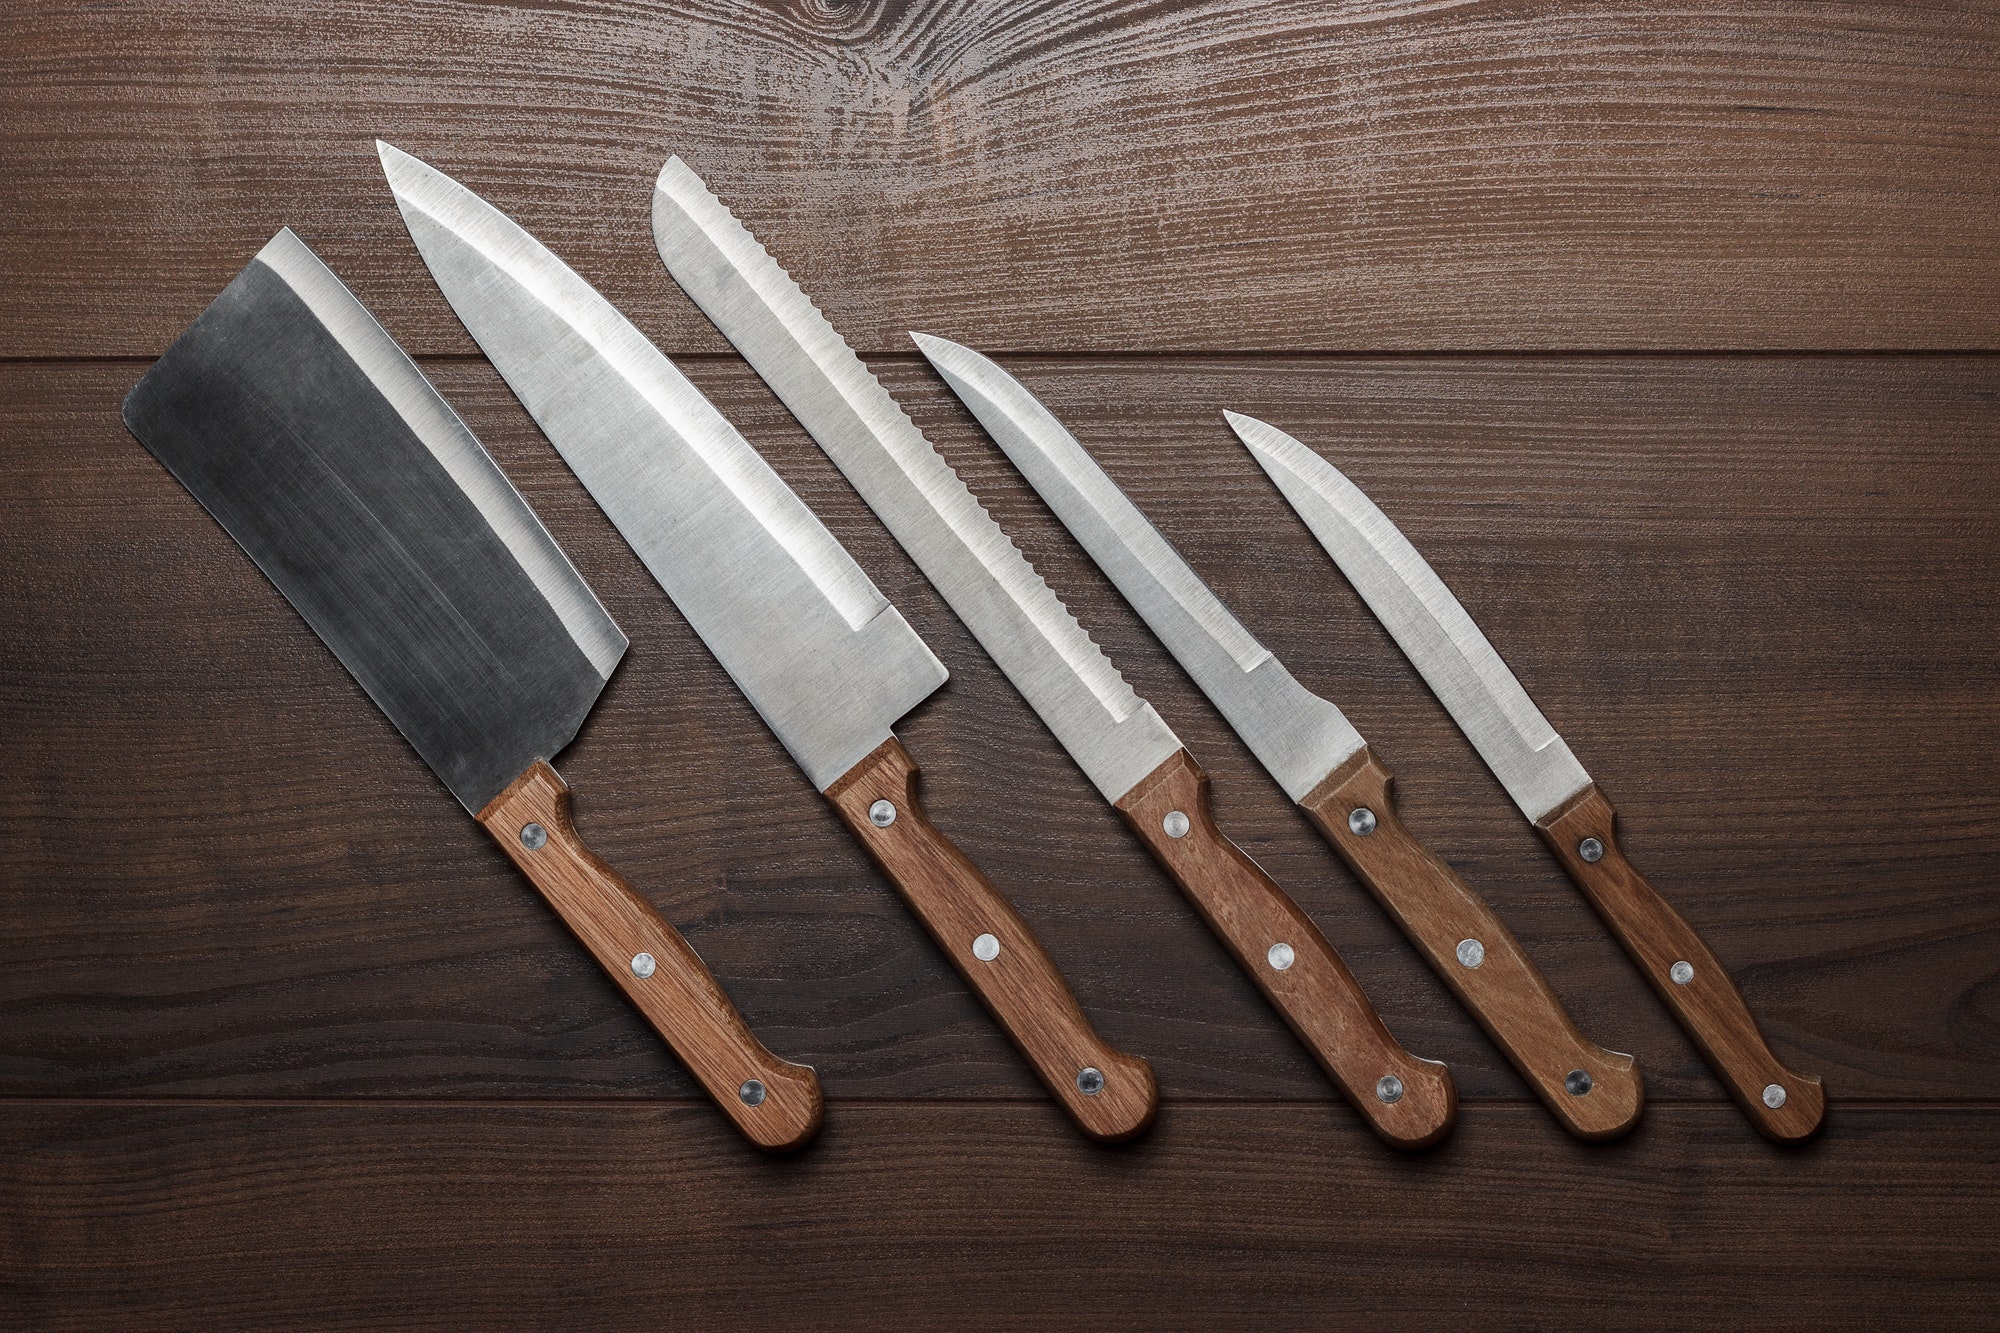 Kitchen Knifes On The Brown Wooden Table